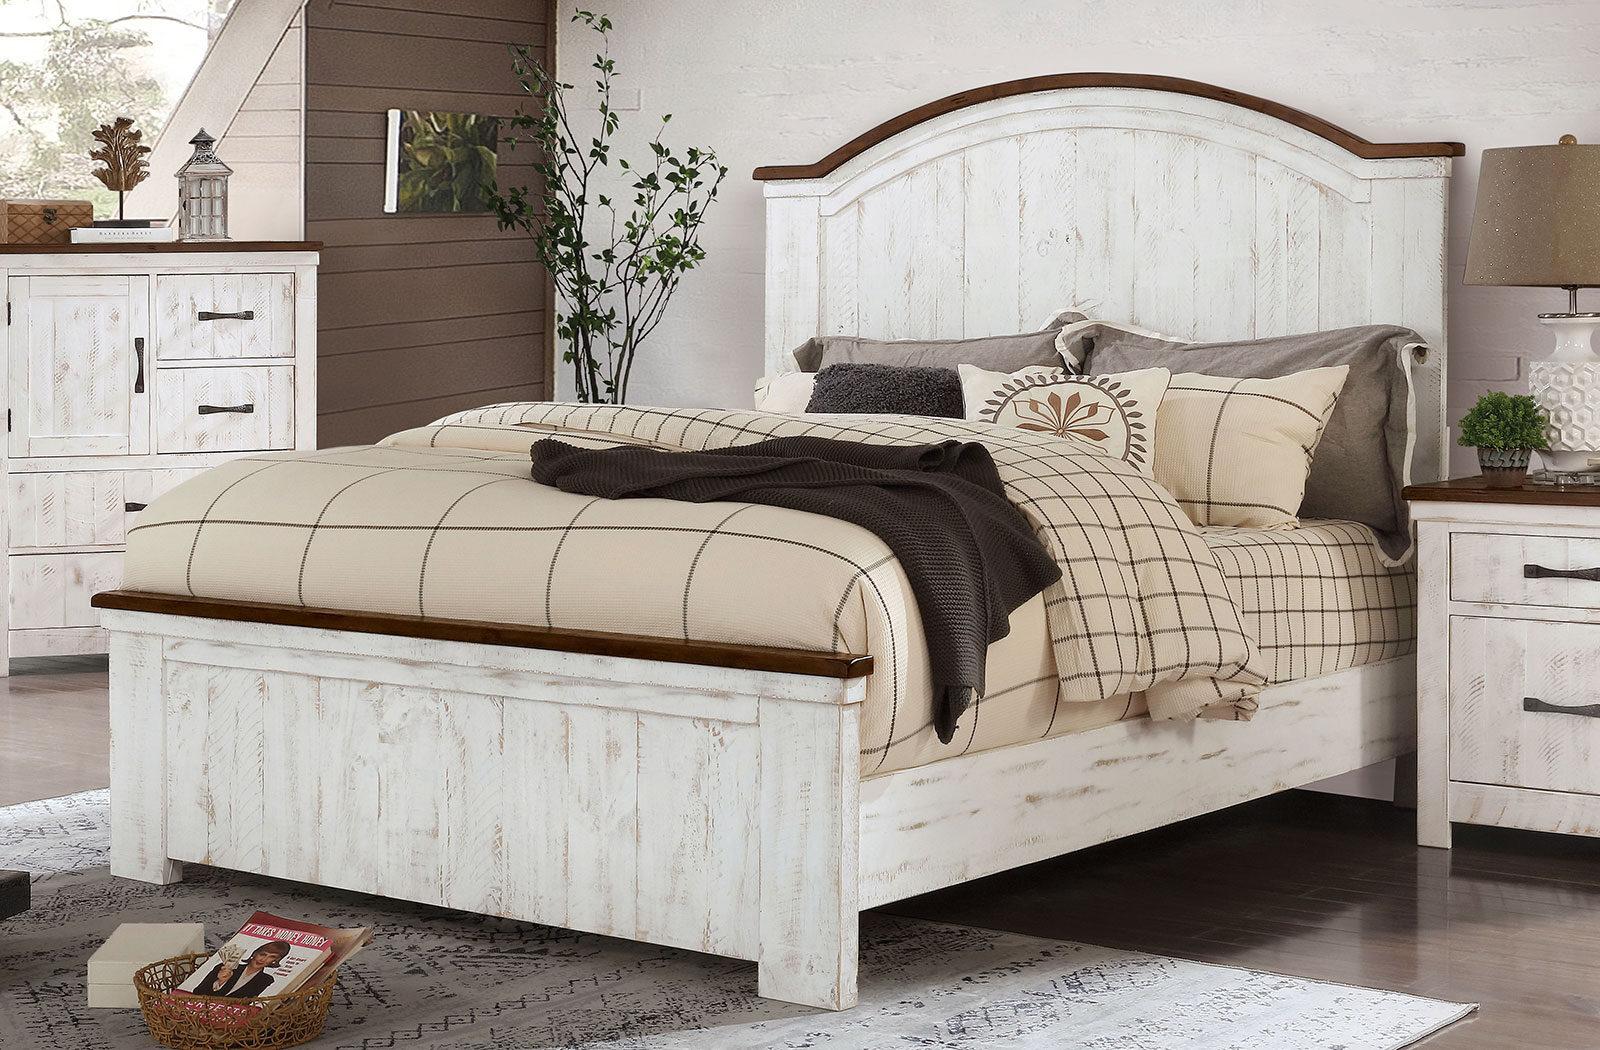 

    
Transitional Distressed White & Walnut Solid Wood King Bedroom Set 5pcs Furniture of America CM7962 Alyson
